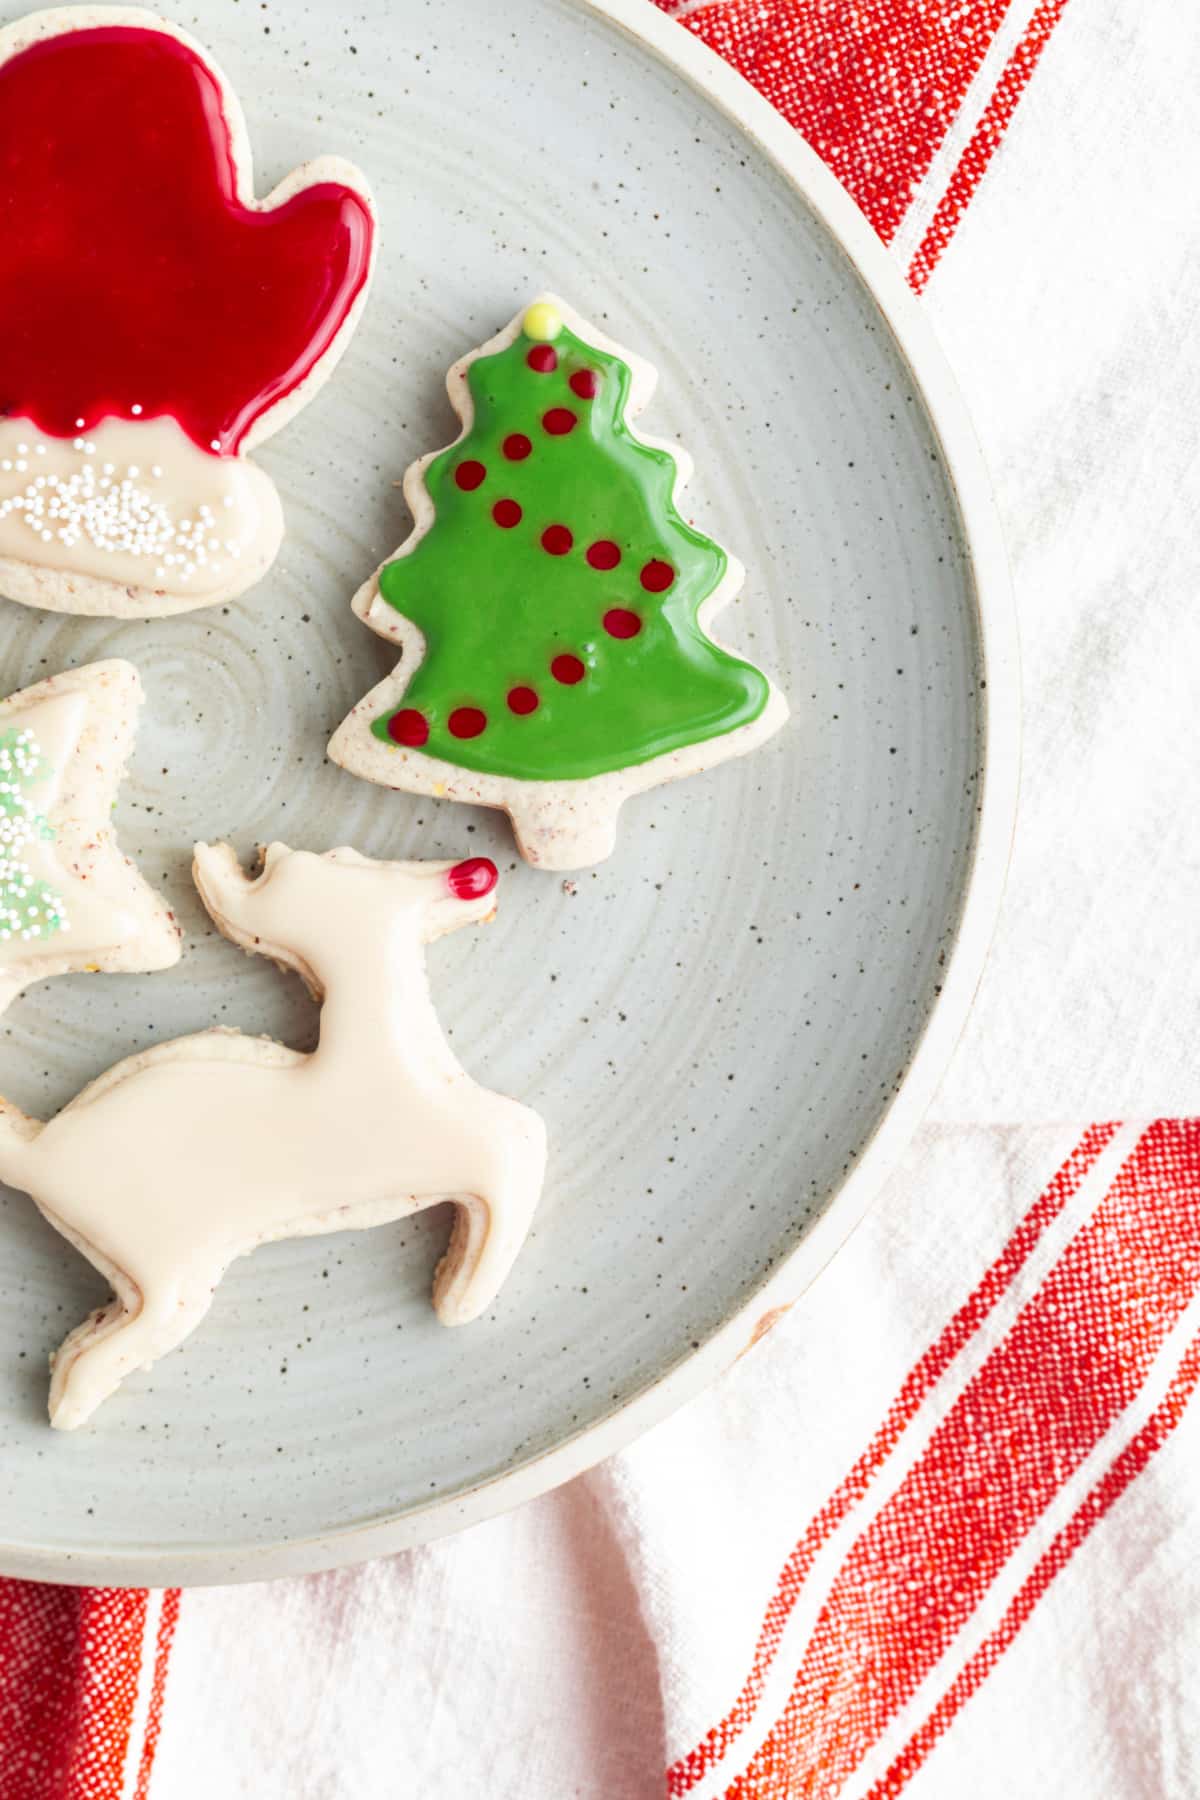 Frosted gluten free vegan cut out cookies in holiday shapes sit on a serving plate: a red mitten, a green Christmas tree with red dots, and a white reindeer with a red nose.